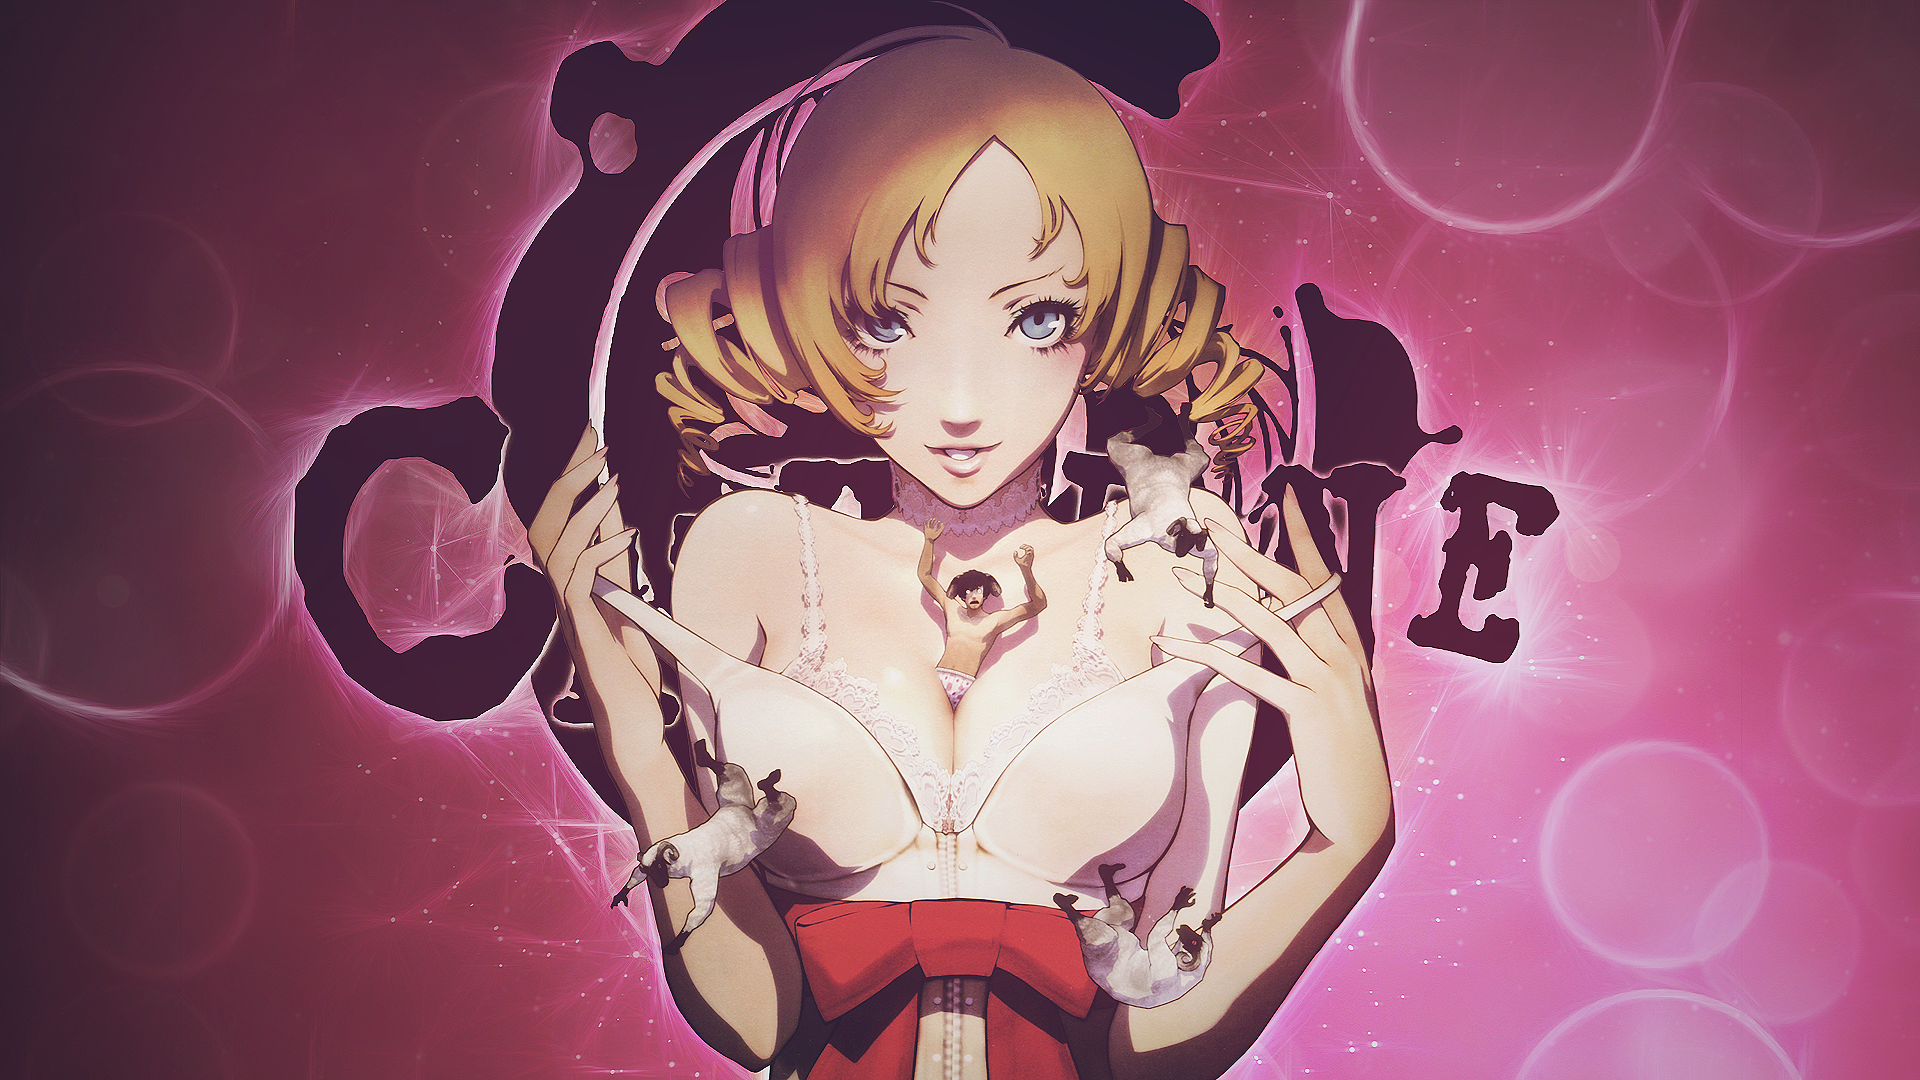 Catherine Wallpapers